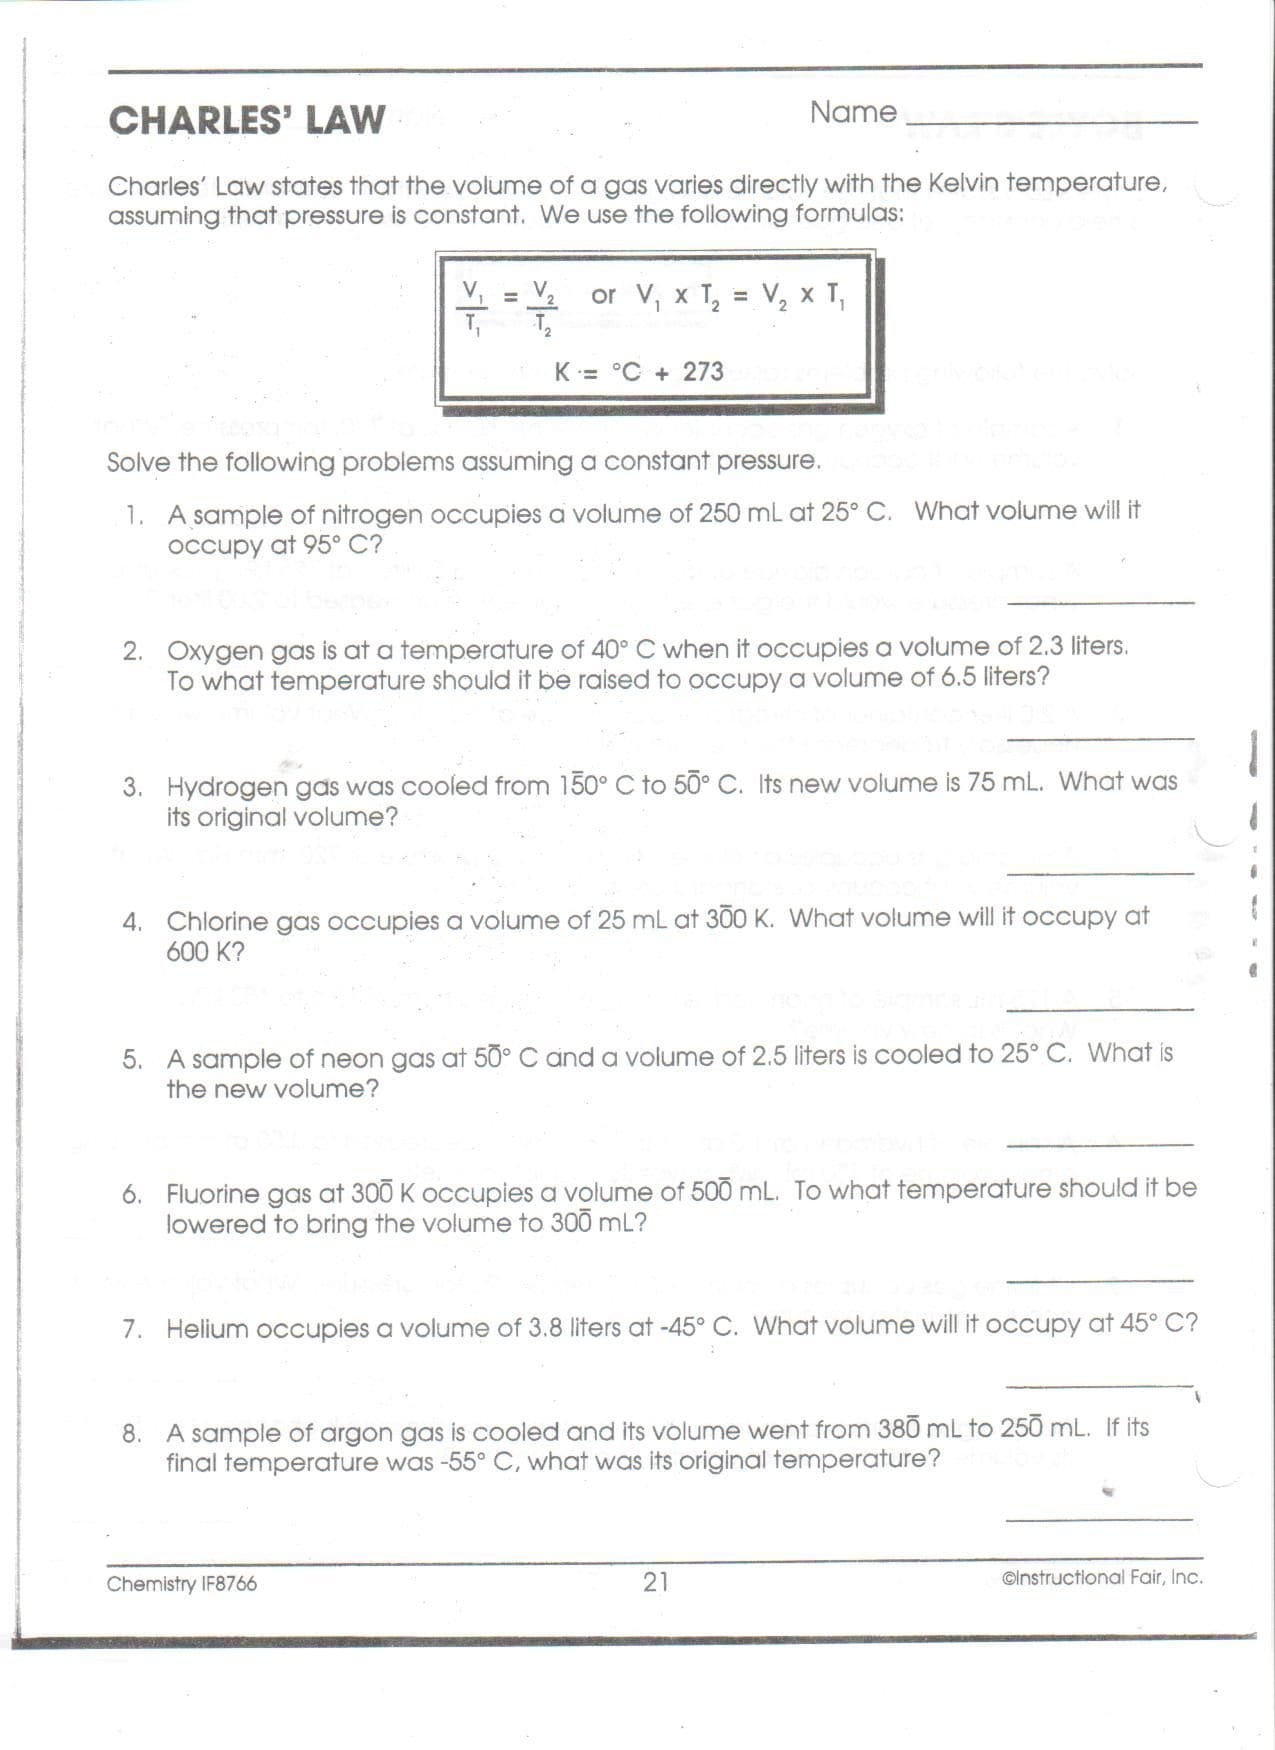 Predicting Products Worksheet Chemistry  Briefencounters Throughout Predicting Products Worksheet Chemistry